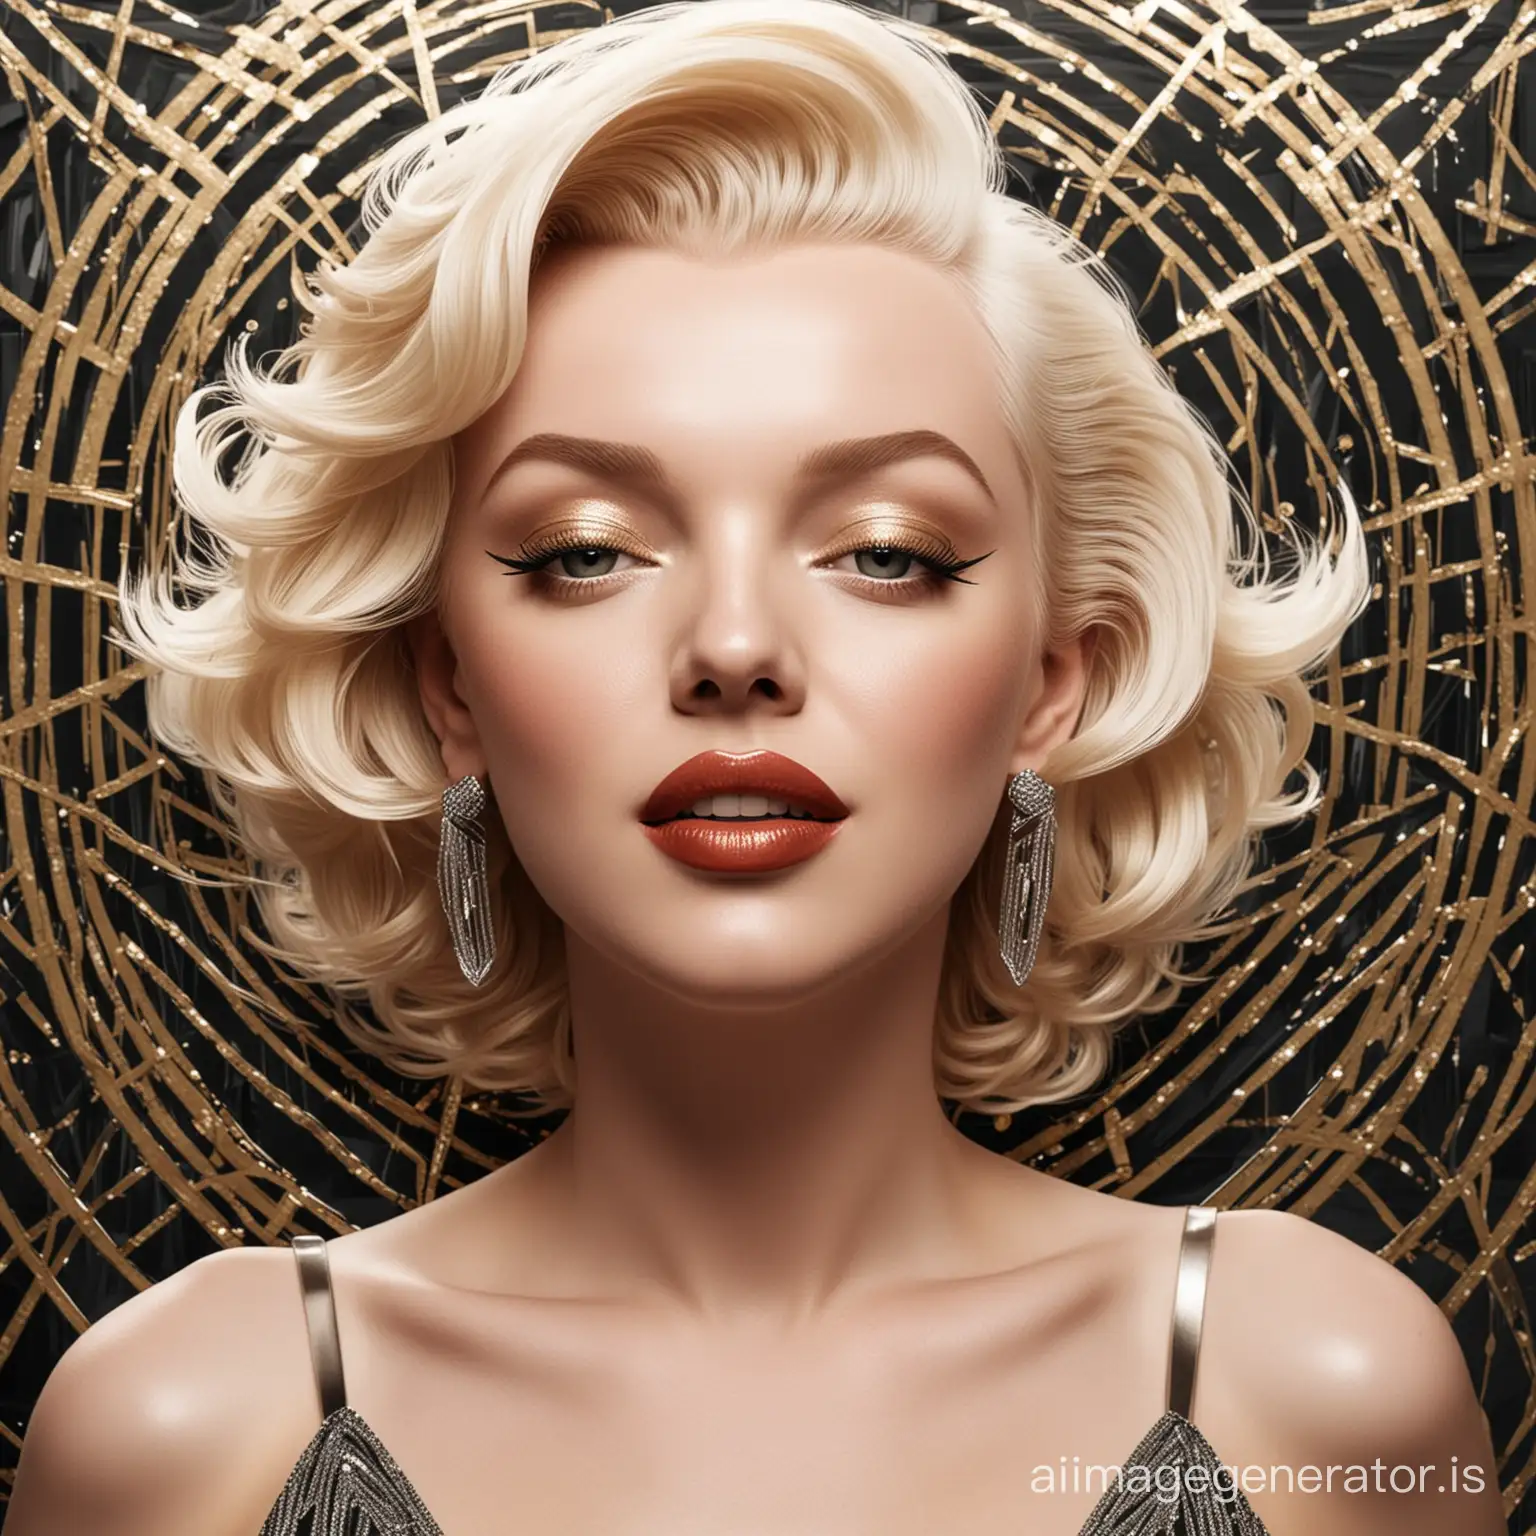 Marilyn Monroe in the style of Art Deco, with geometric lines and sleek metallics.